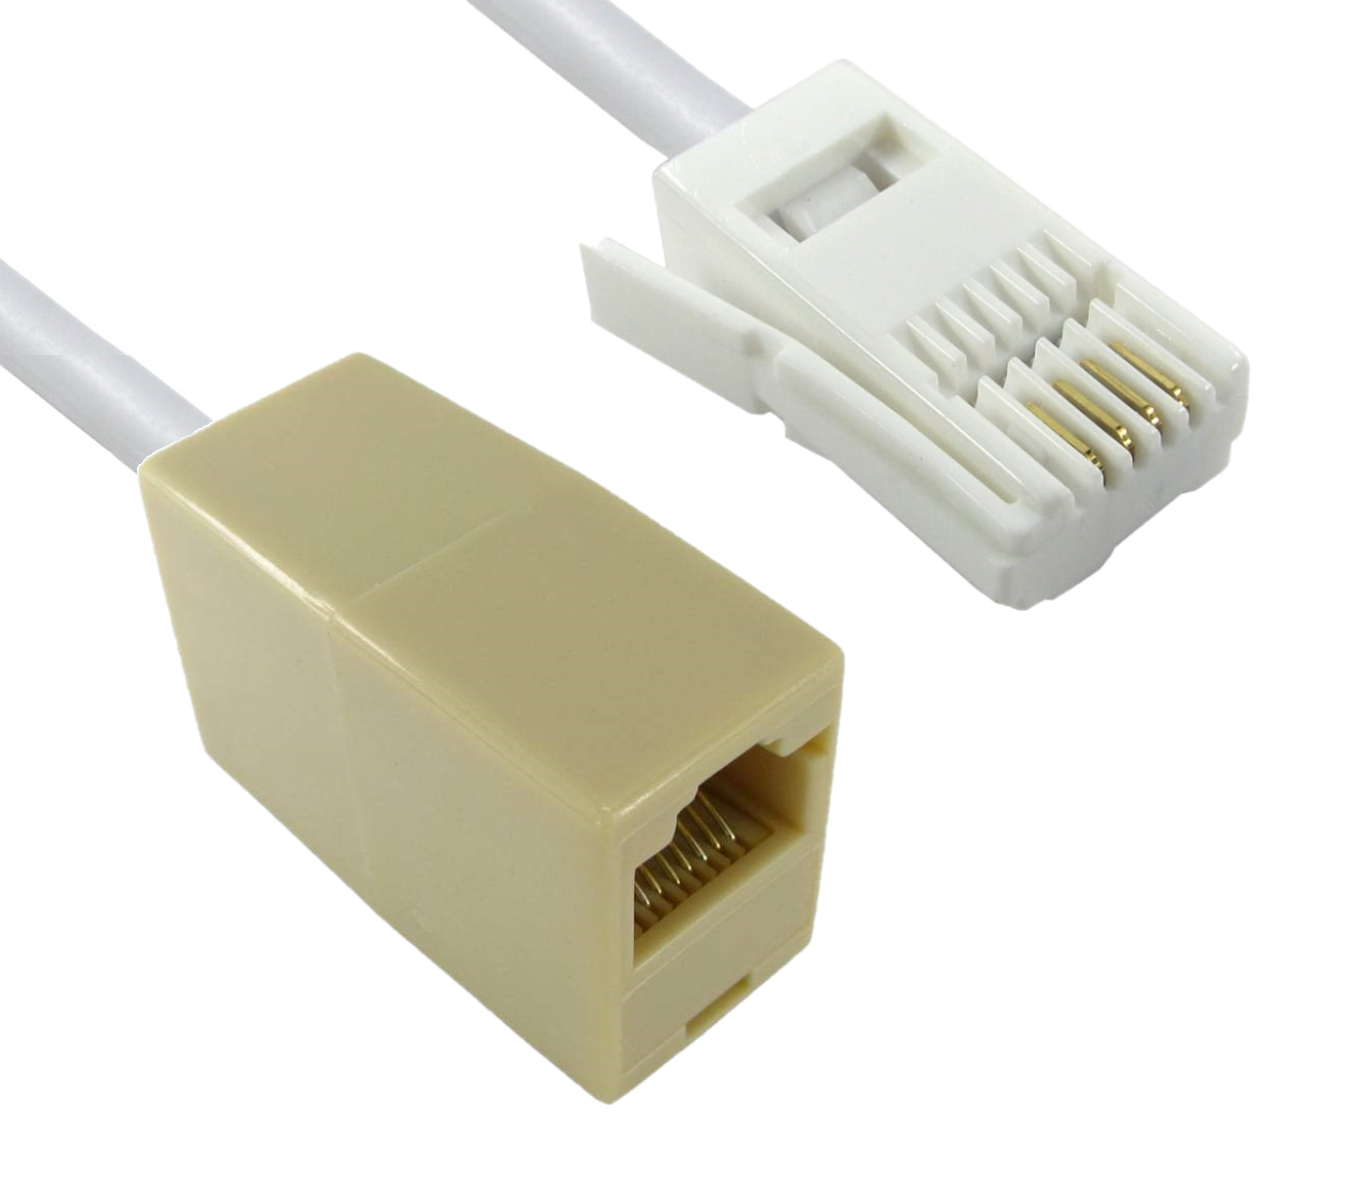 BT Male to RJ45 Female Extension Leads 1m to 30m Lengths Bristol Communications